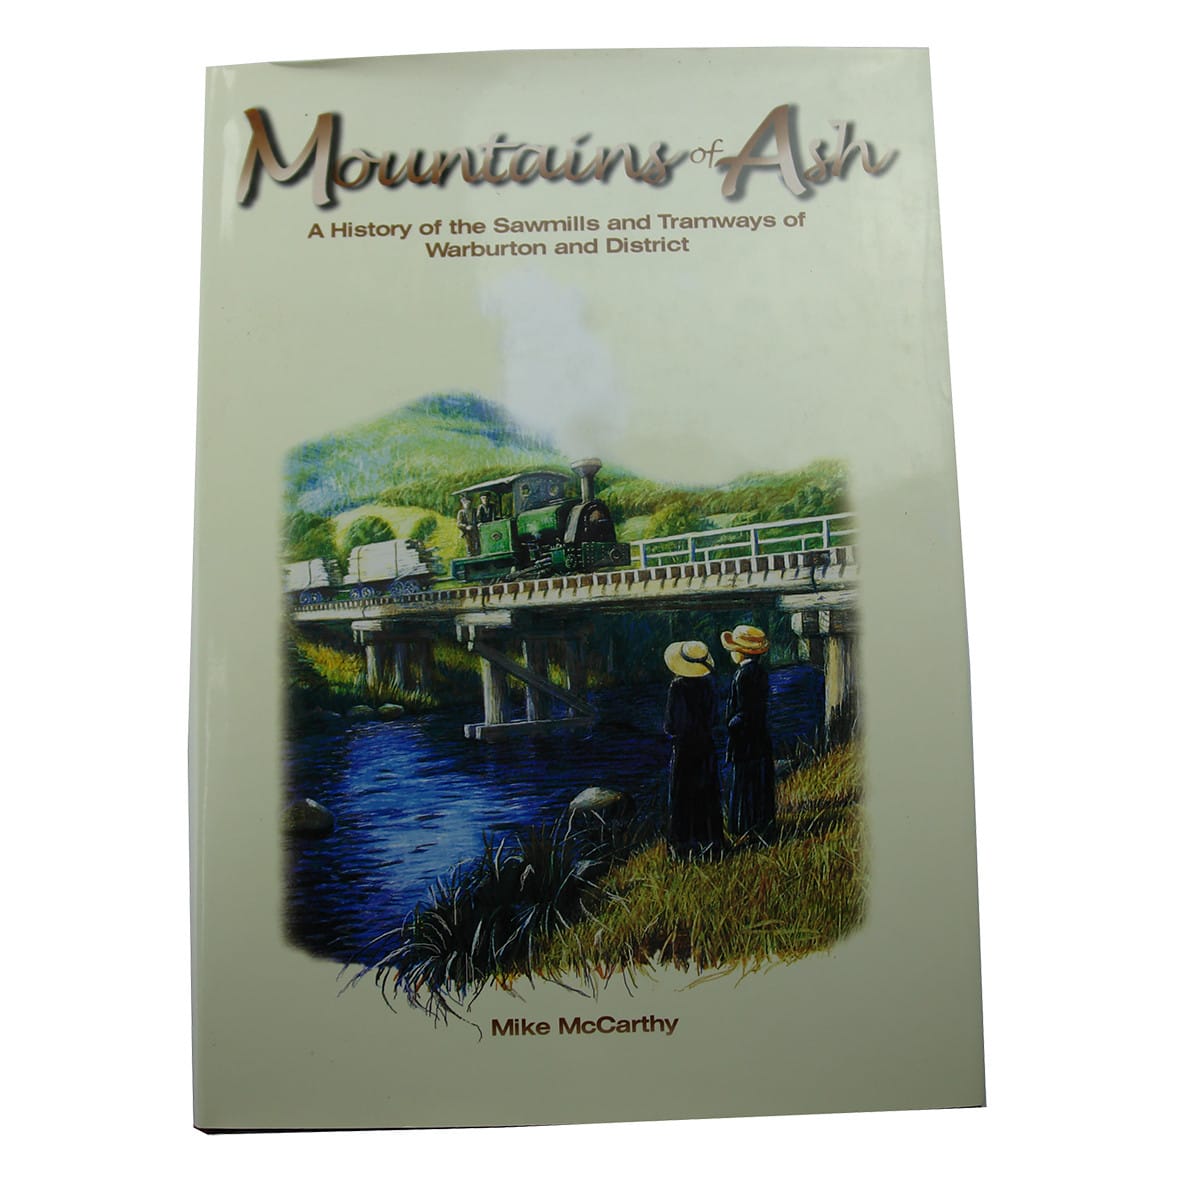 Book. Mountains of Ash, A history of the sawmills and tramways of Warburton and District, Mike McCarthy.